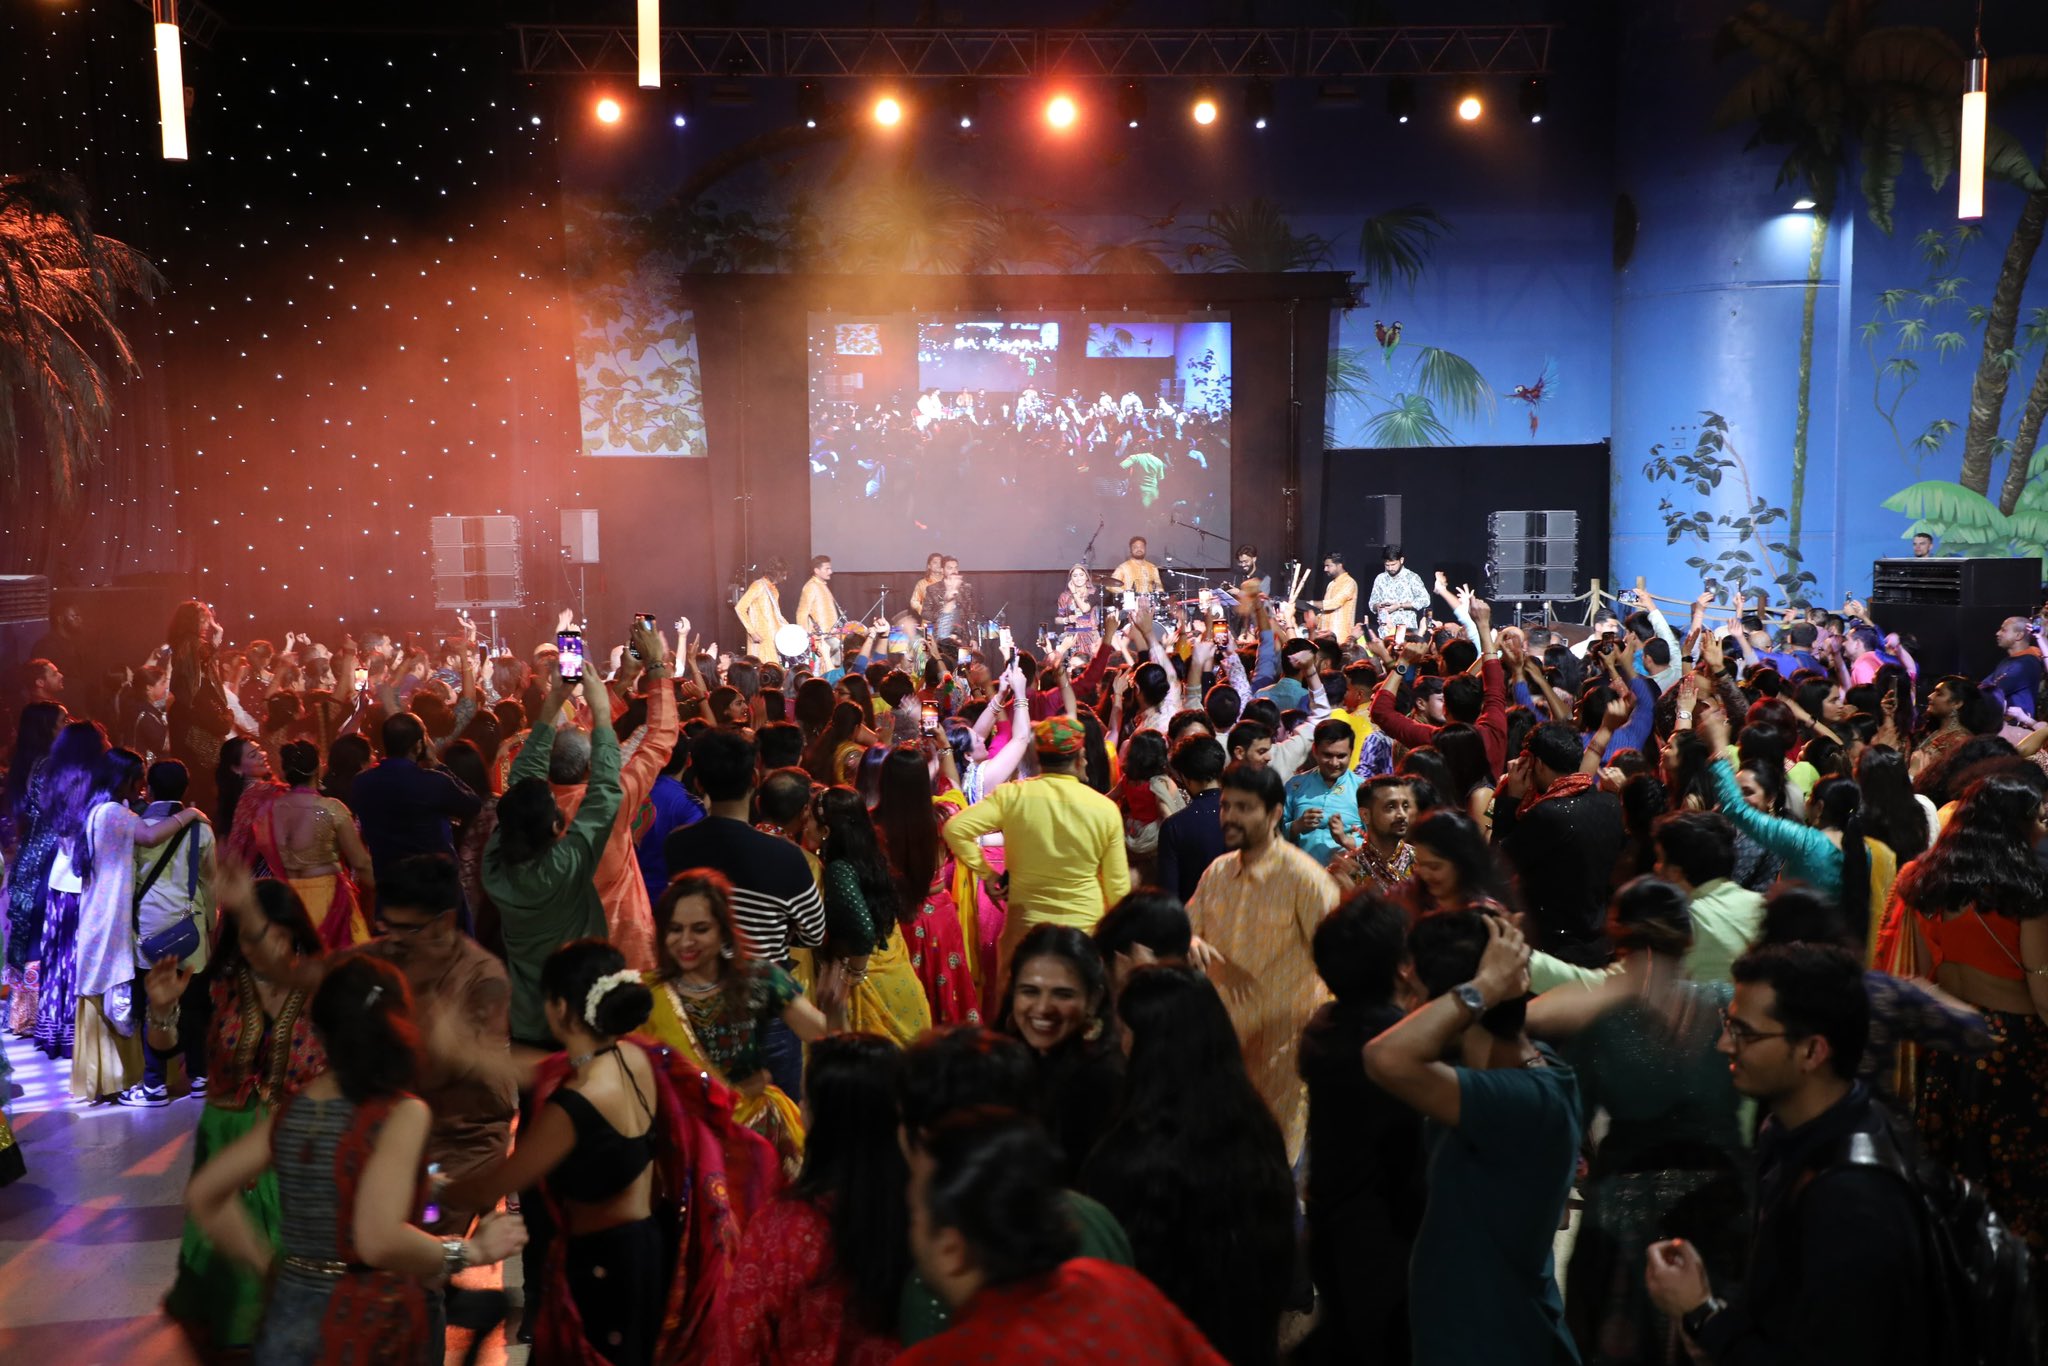 Huge Garba night held in Paris as the traditional Indian dance receives UNESCO Certificate of Inscription